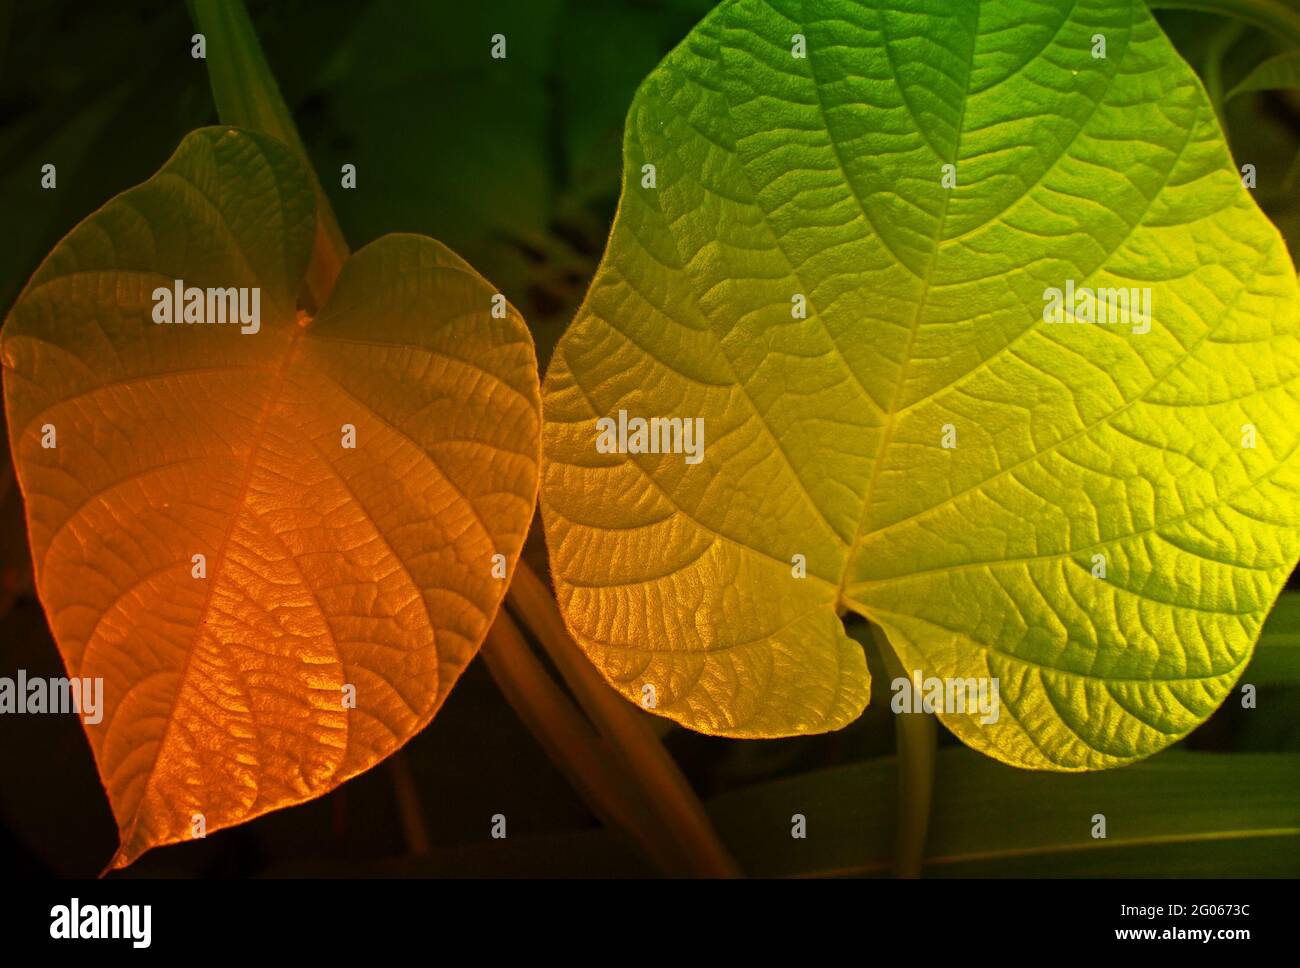 Green leaves, texture of nature, stock photograph with natural background, filtered image Stock Photo